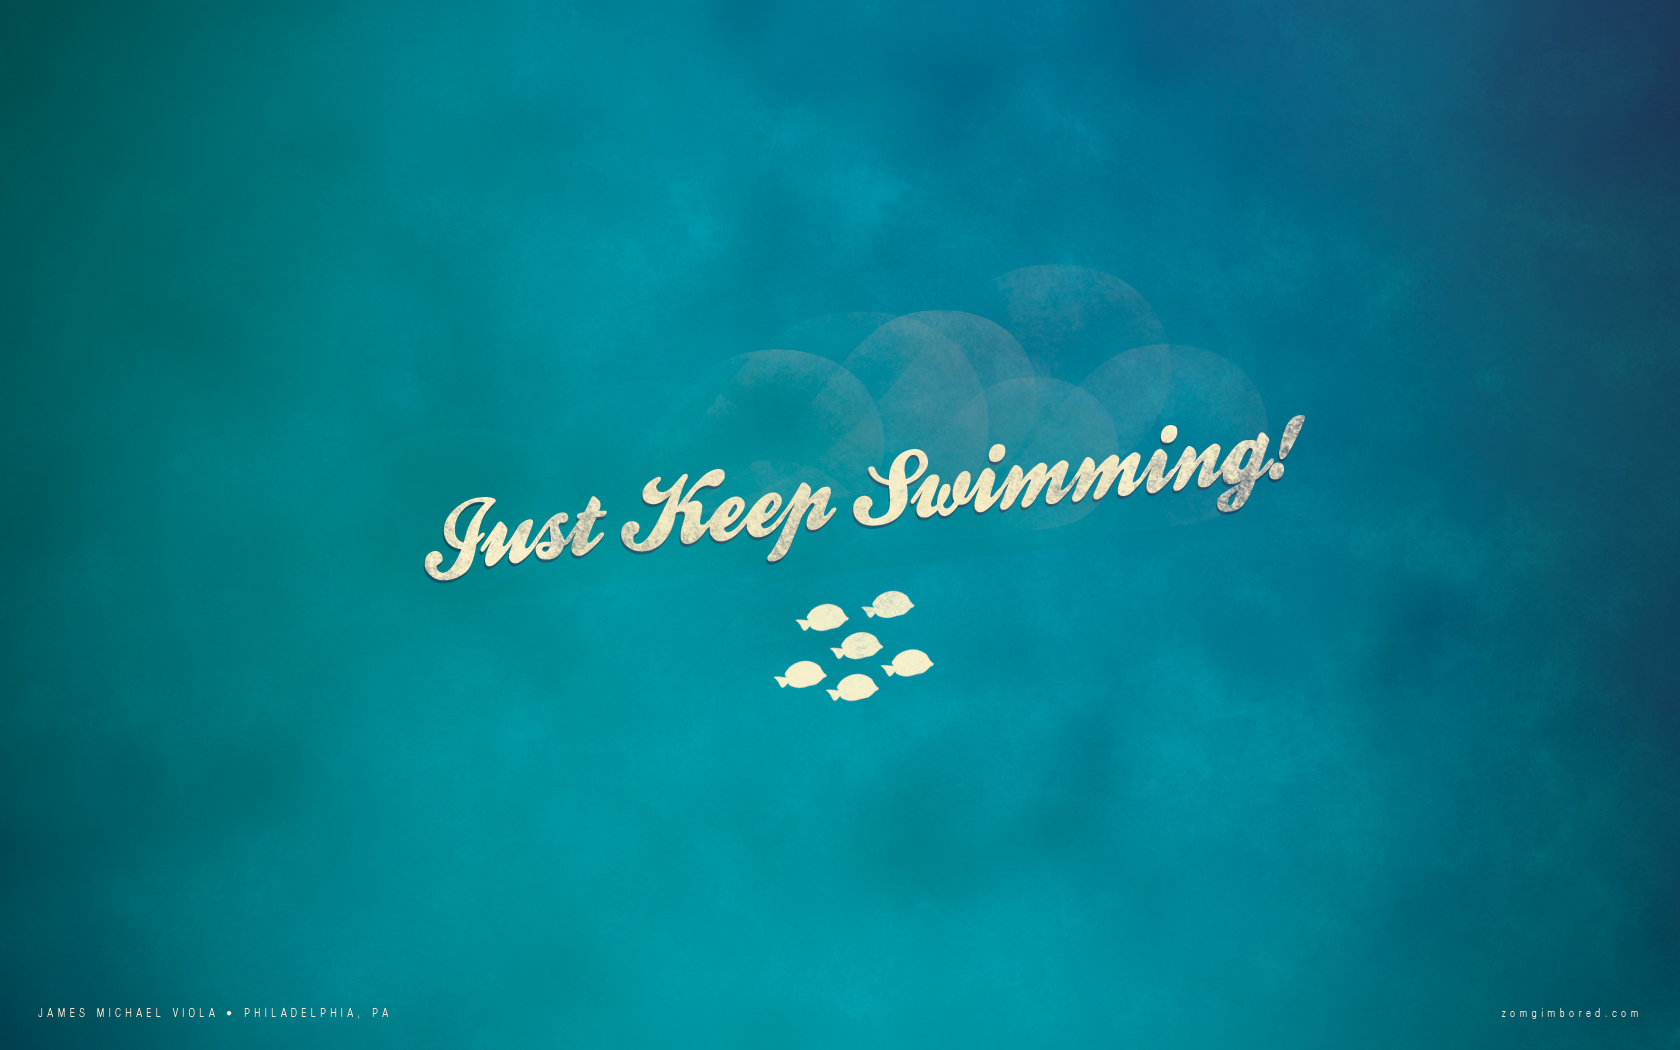 Just Keep Swimming Wallpaper And Poster